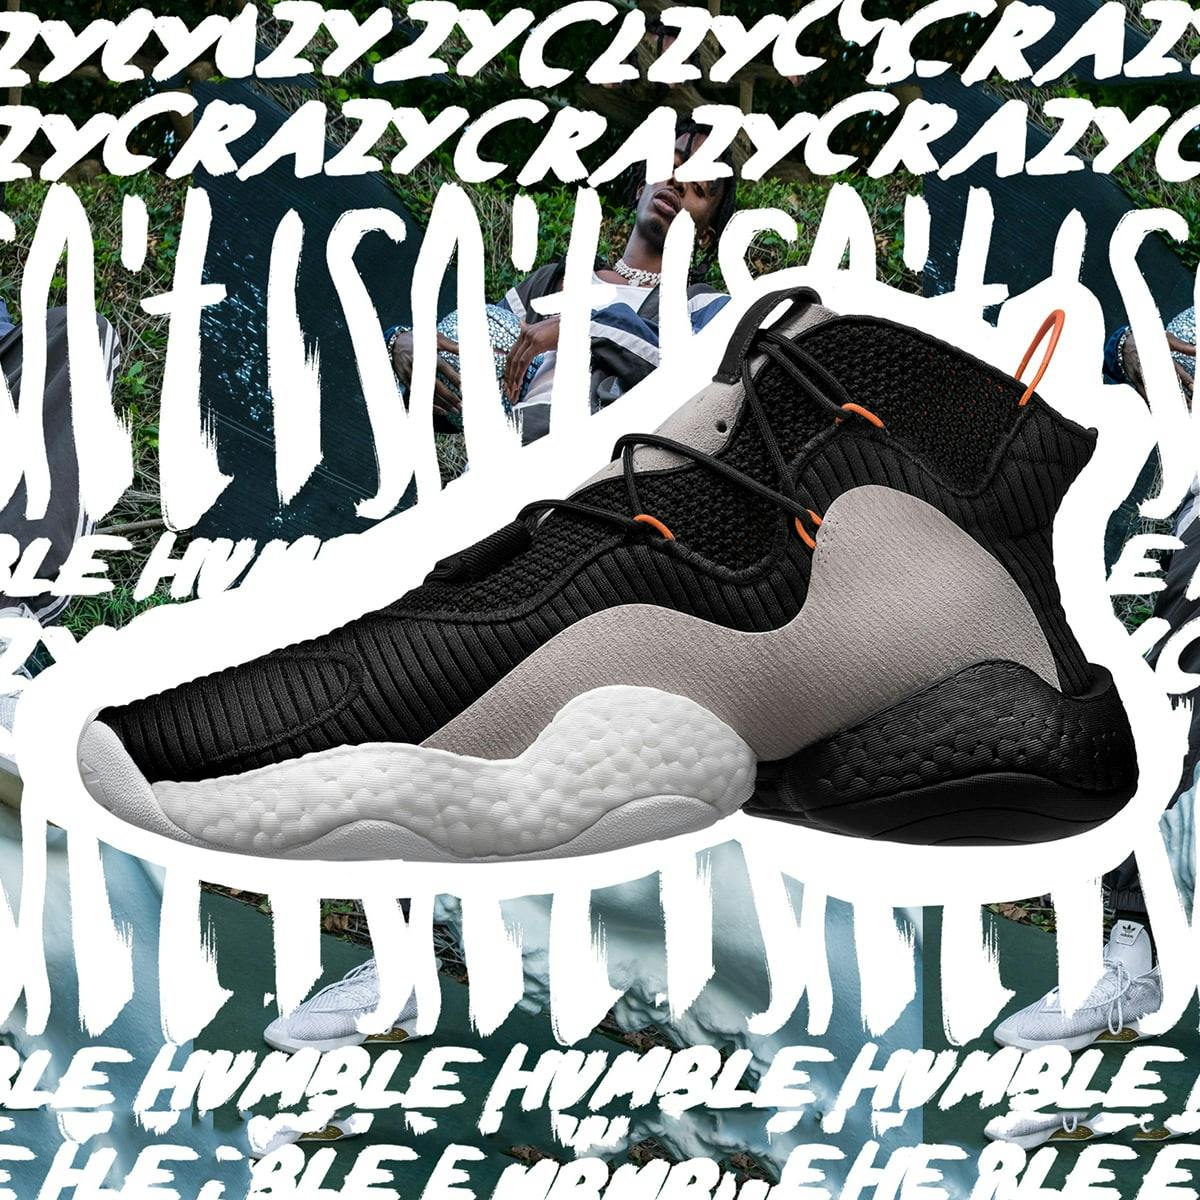 adidas BYW LVL 1 Official Images